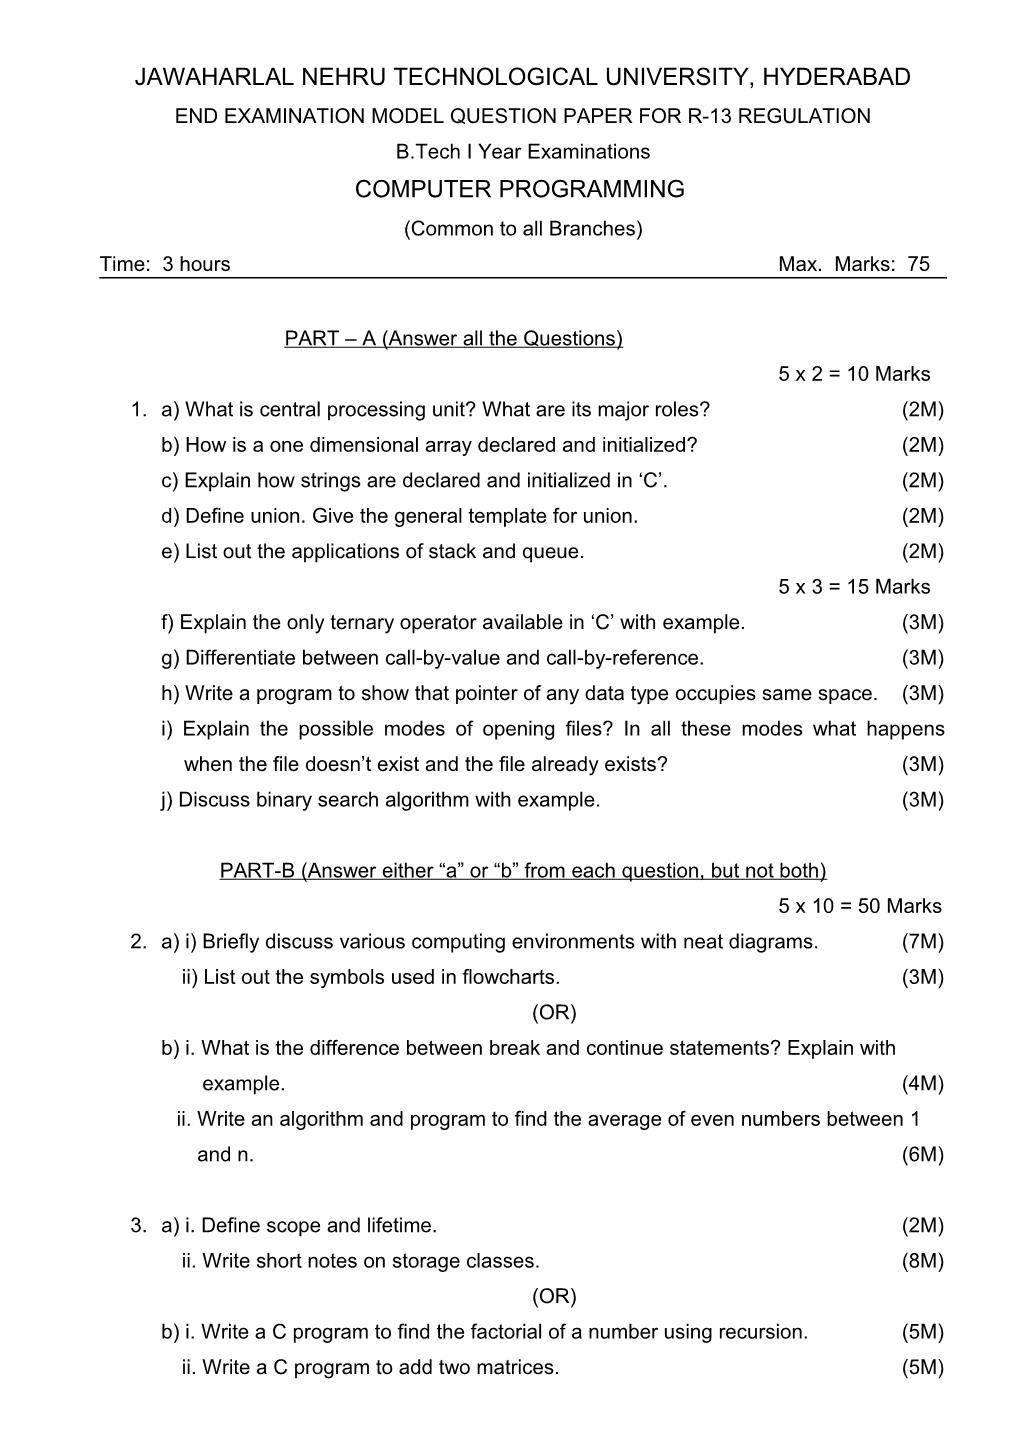 End Examination Question Paper Pattern for R13 Regulation